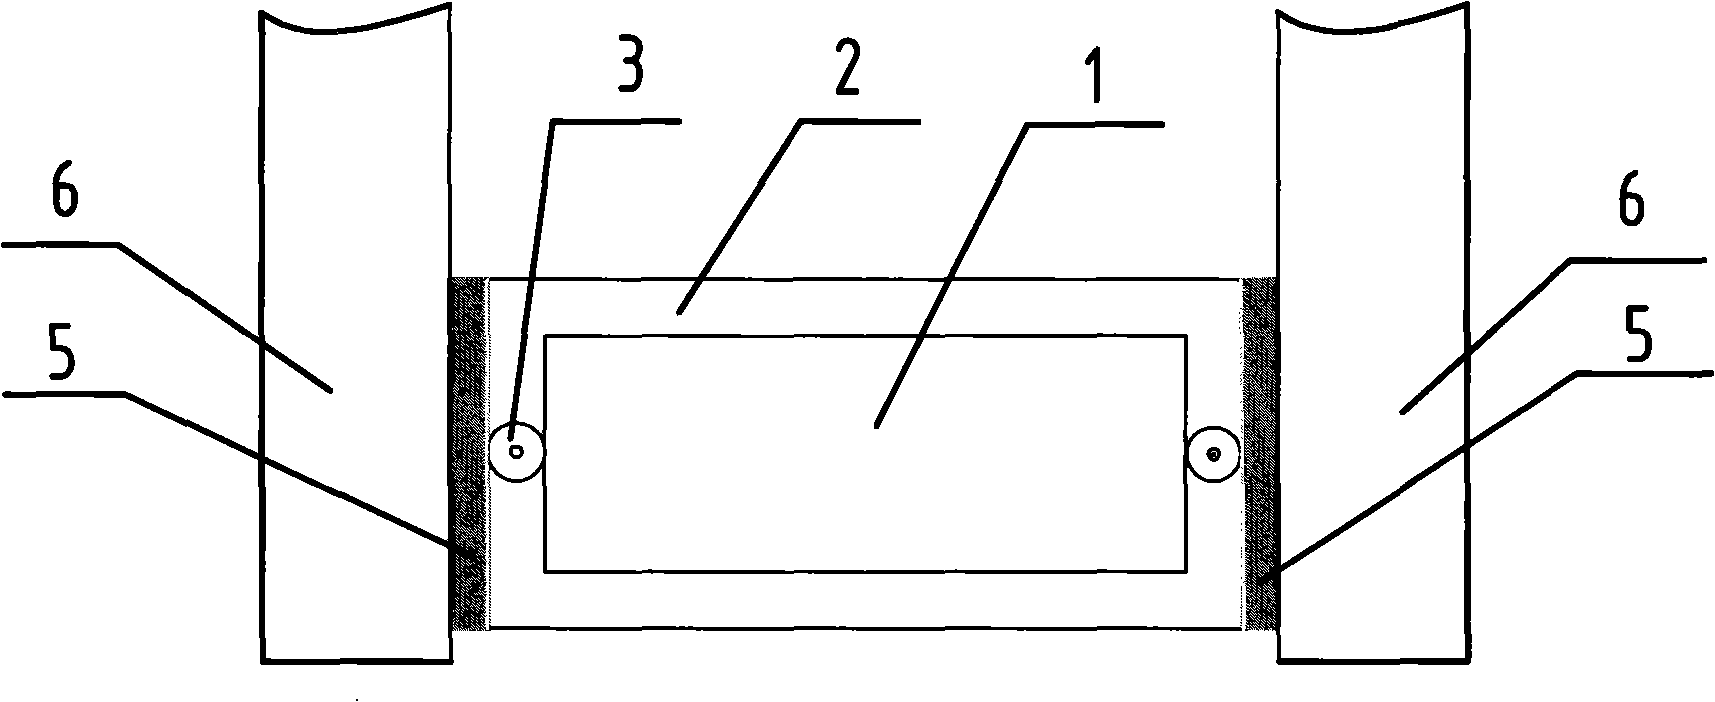 Hollow glass spacing section bar